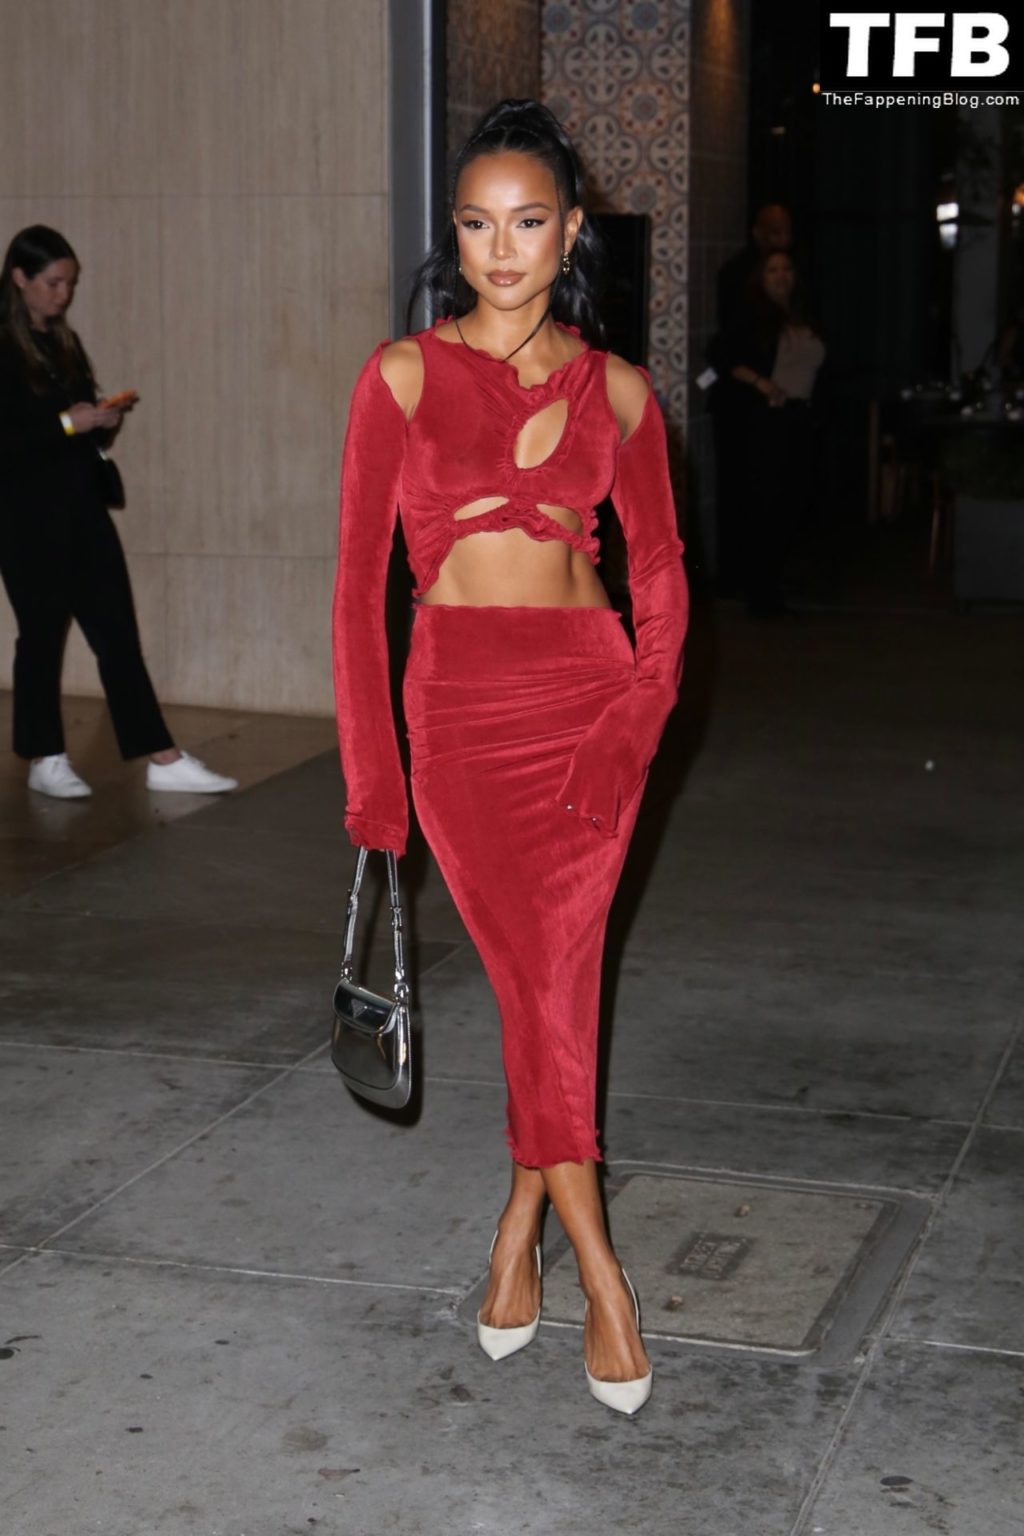 Karrueche Tran Sexy The Fappening Blog 41 1024x1536 - Karrueche Tran Shows Her Pokies in a Red Dress at The Hollywood Reporter’s Oscar Nominees Night (68 Photos)